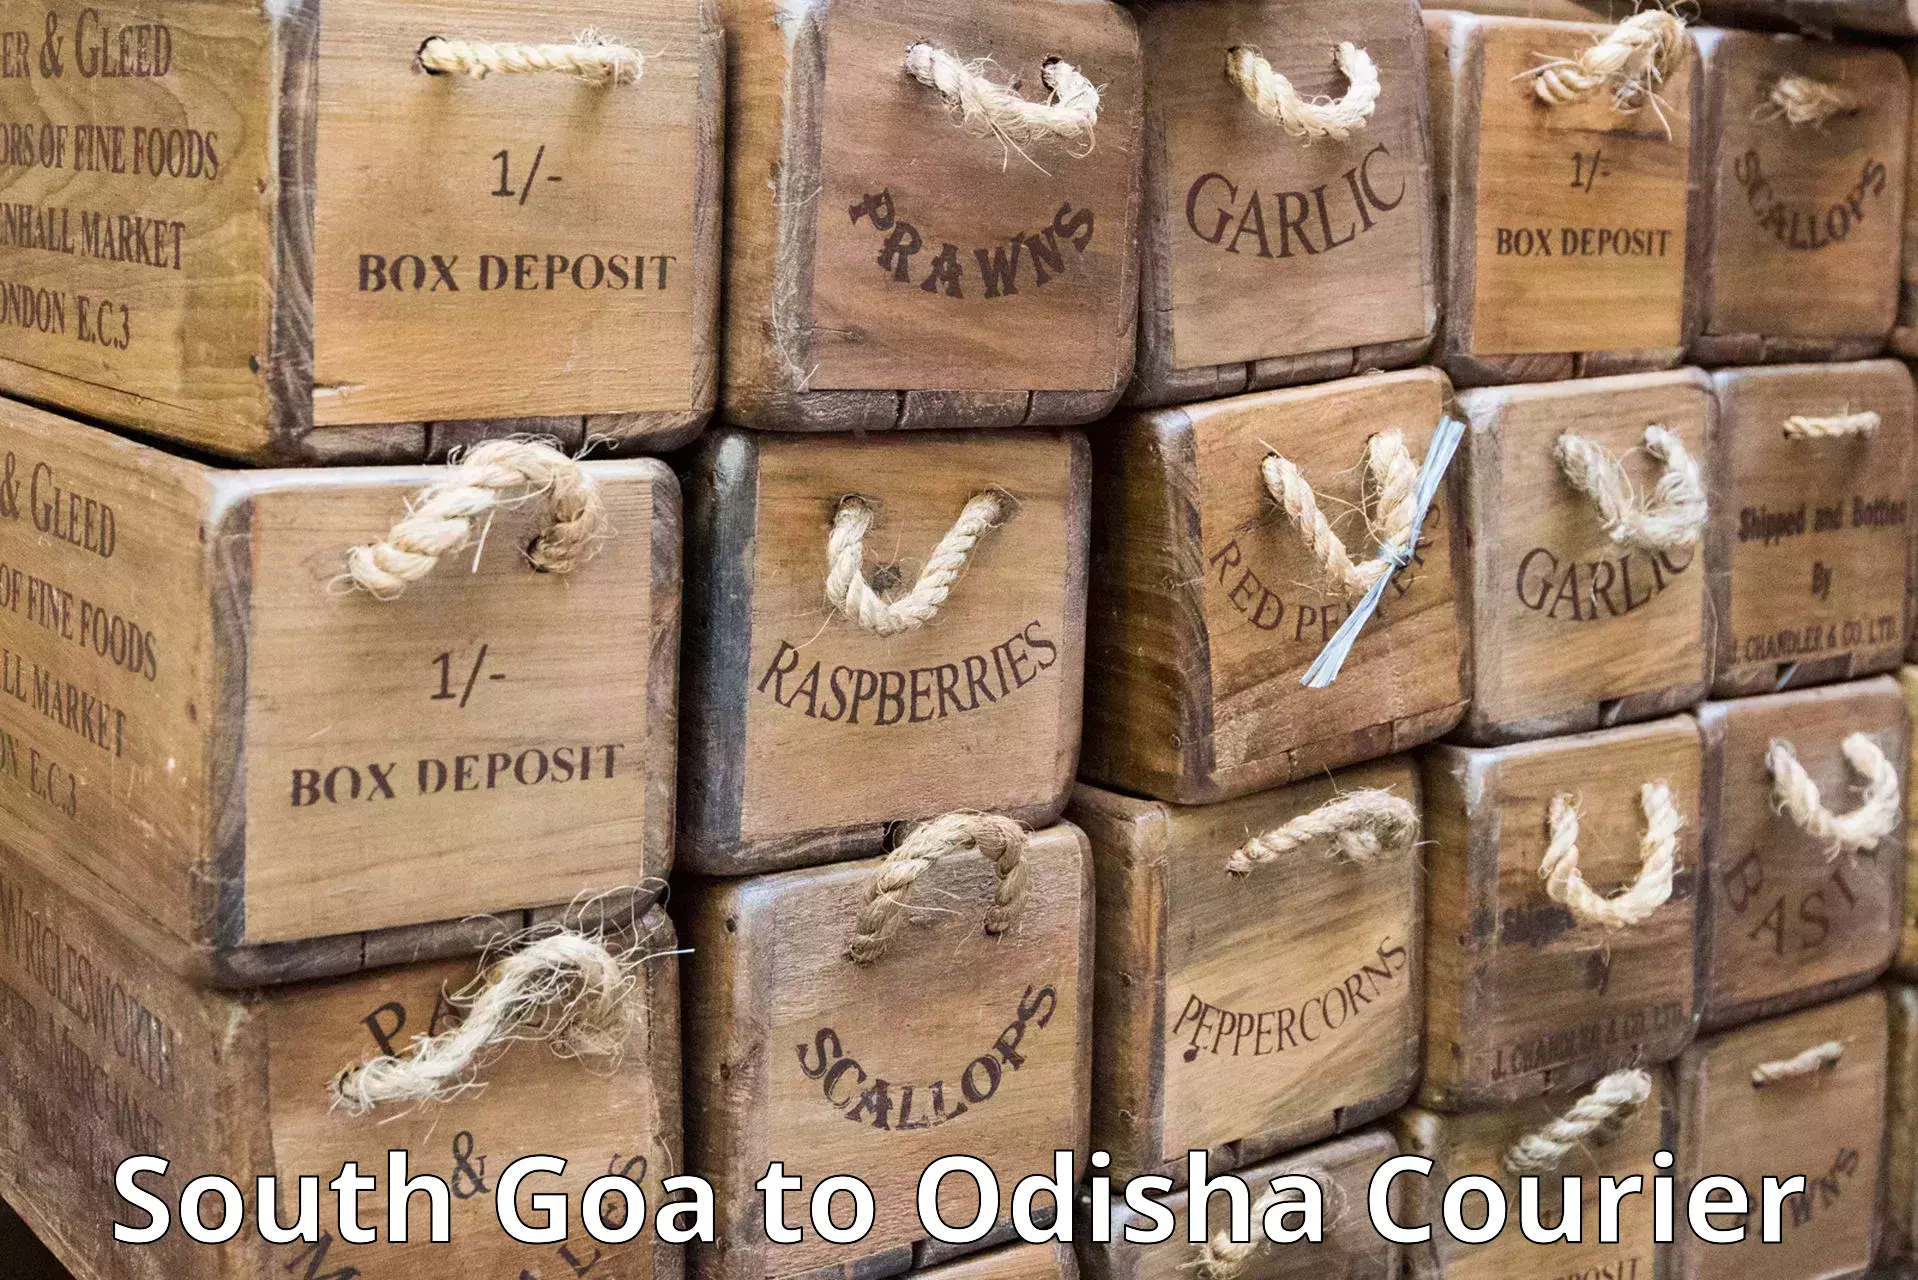 Ocean freight courier South Goa to Parmanpur